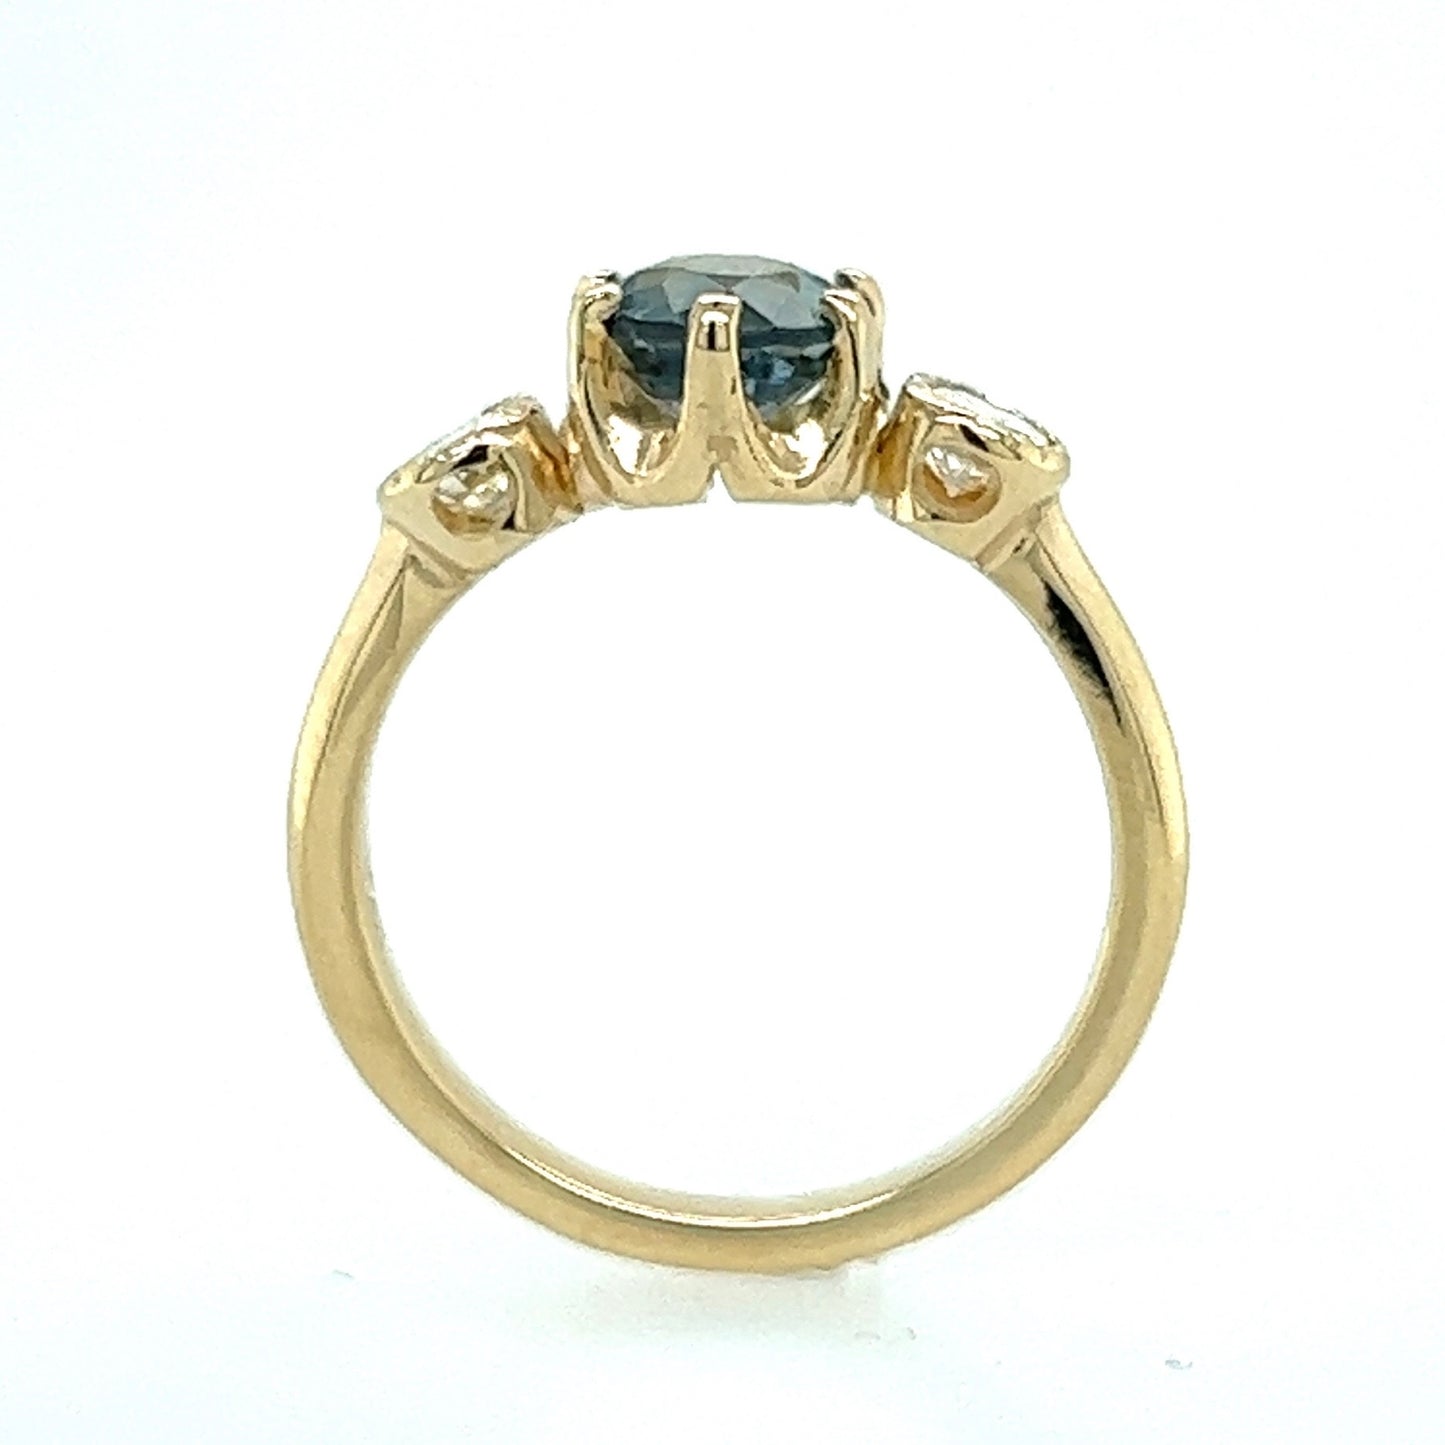 The Queen- Teal sapphire, reclaimed diamonds & 14k Yellow Gold